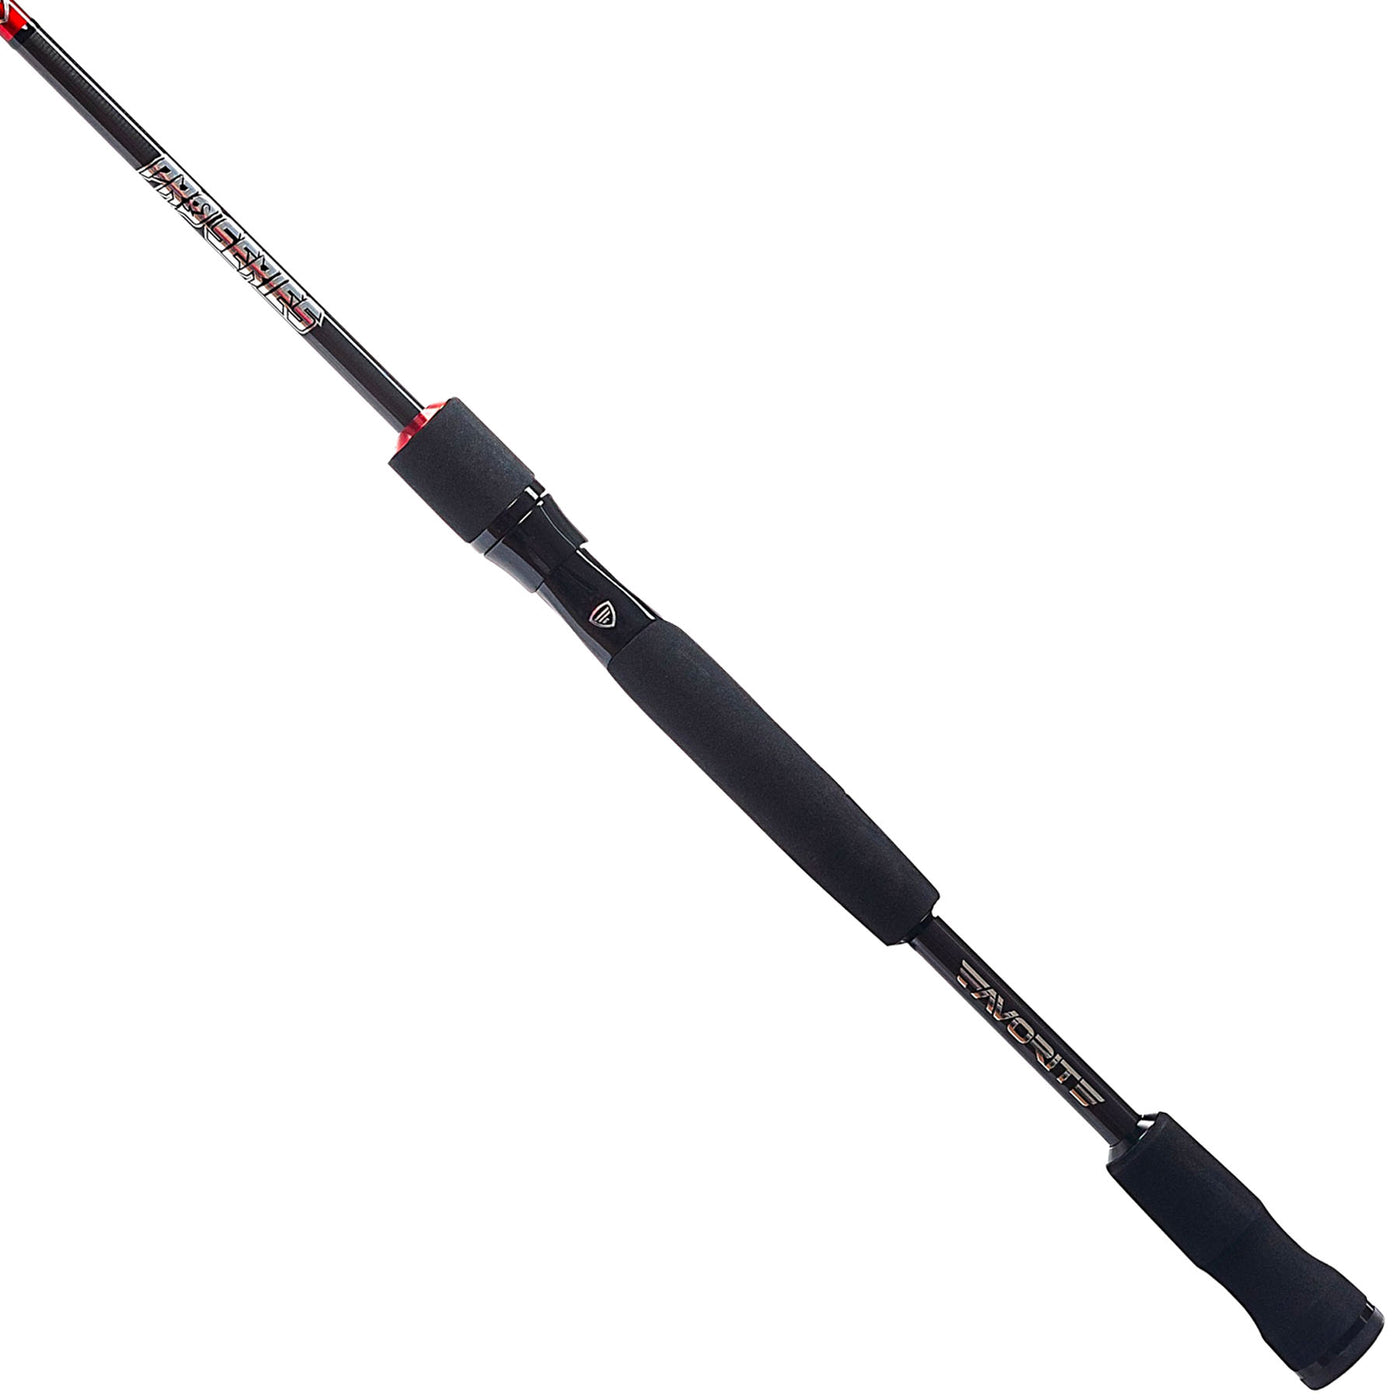 Versatile Fishing Rod, M Power Spinning or Casting Lure Rod, Ultra